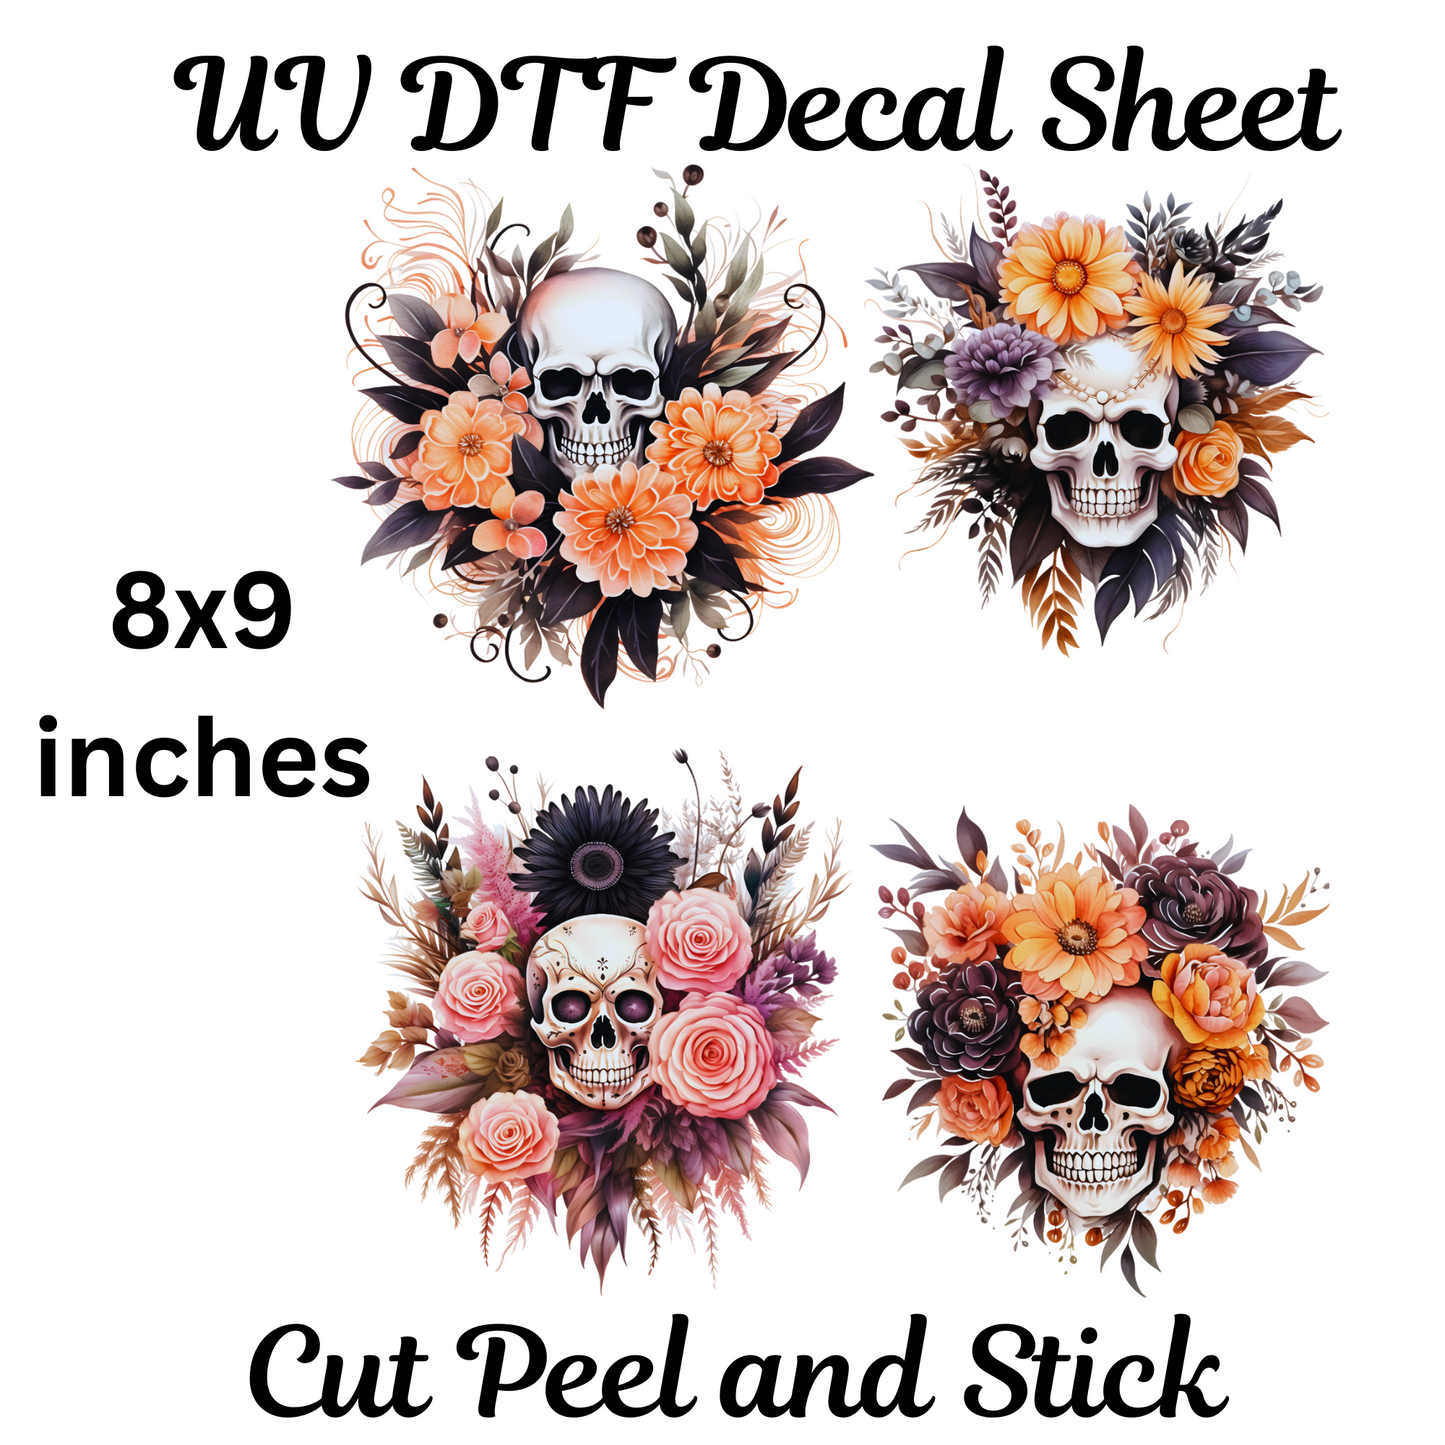 Skulls and flowers UV DTF Decal Sticker sheet 8x9 inches